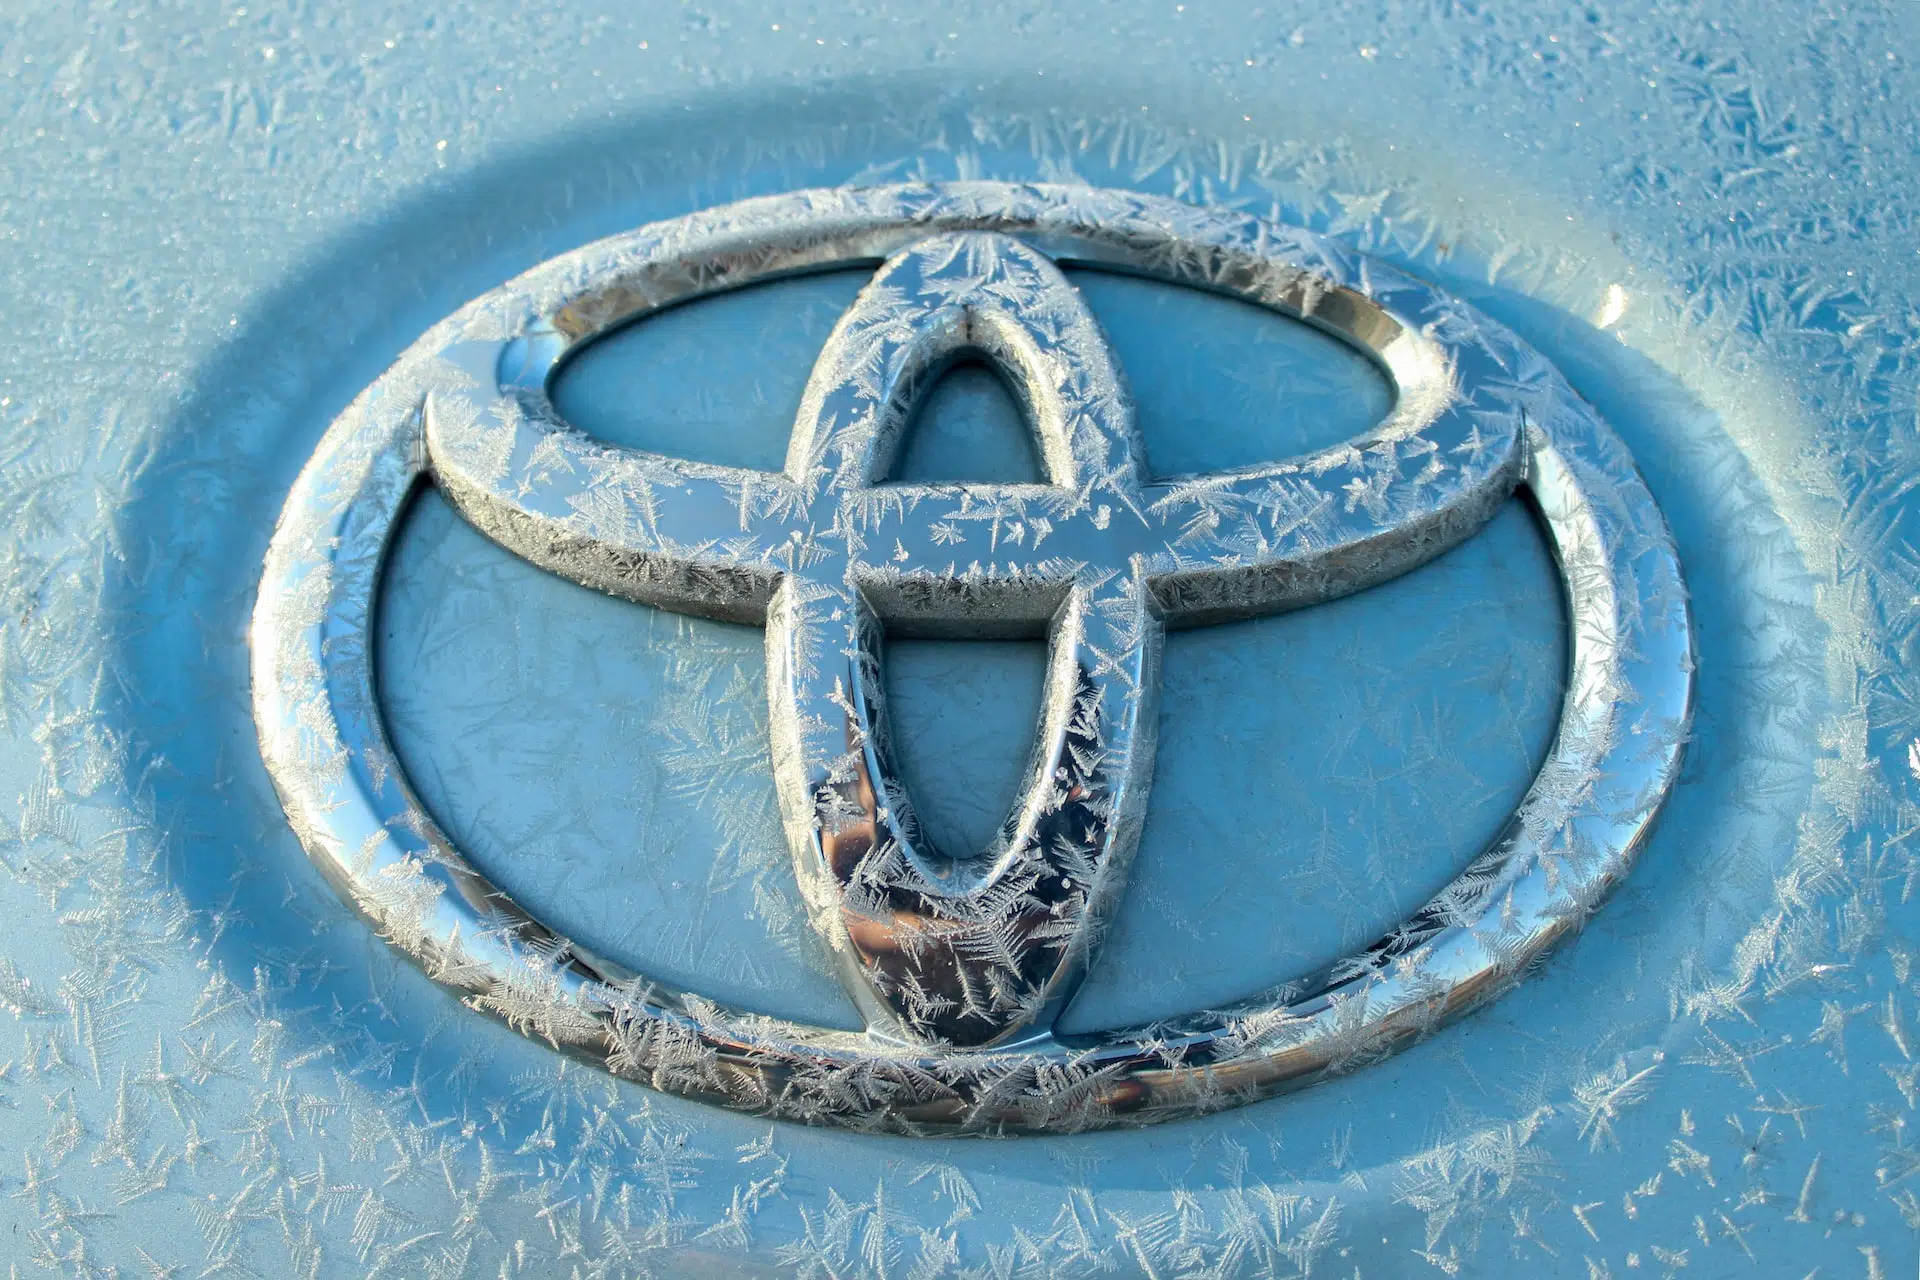 Toyota Confirms a Security Vulnerability Affecting Customer Data